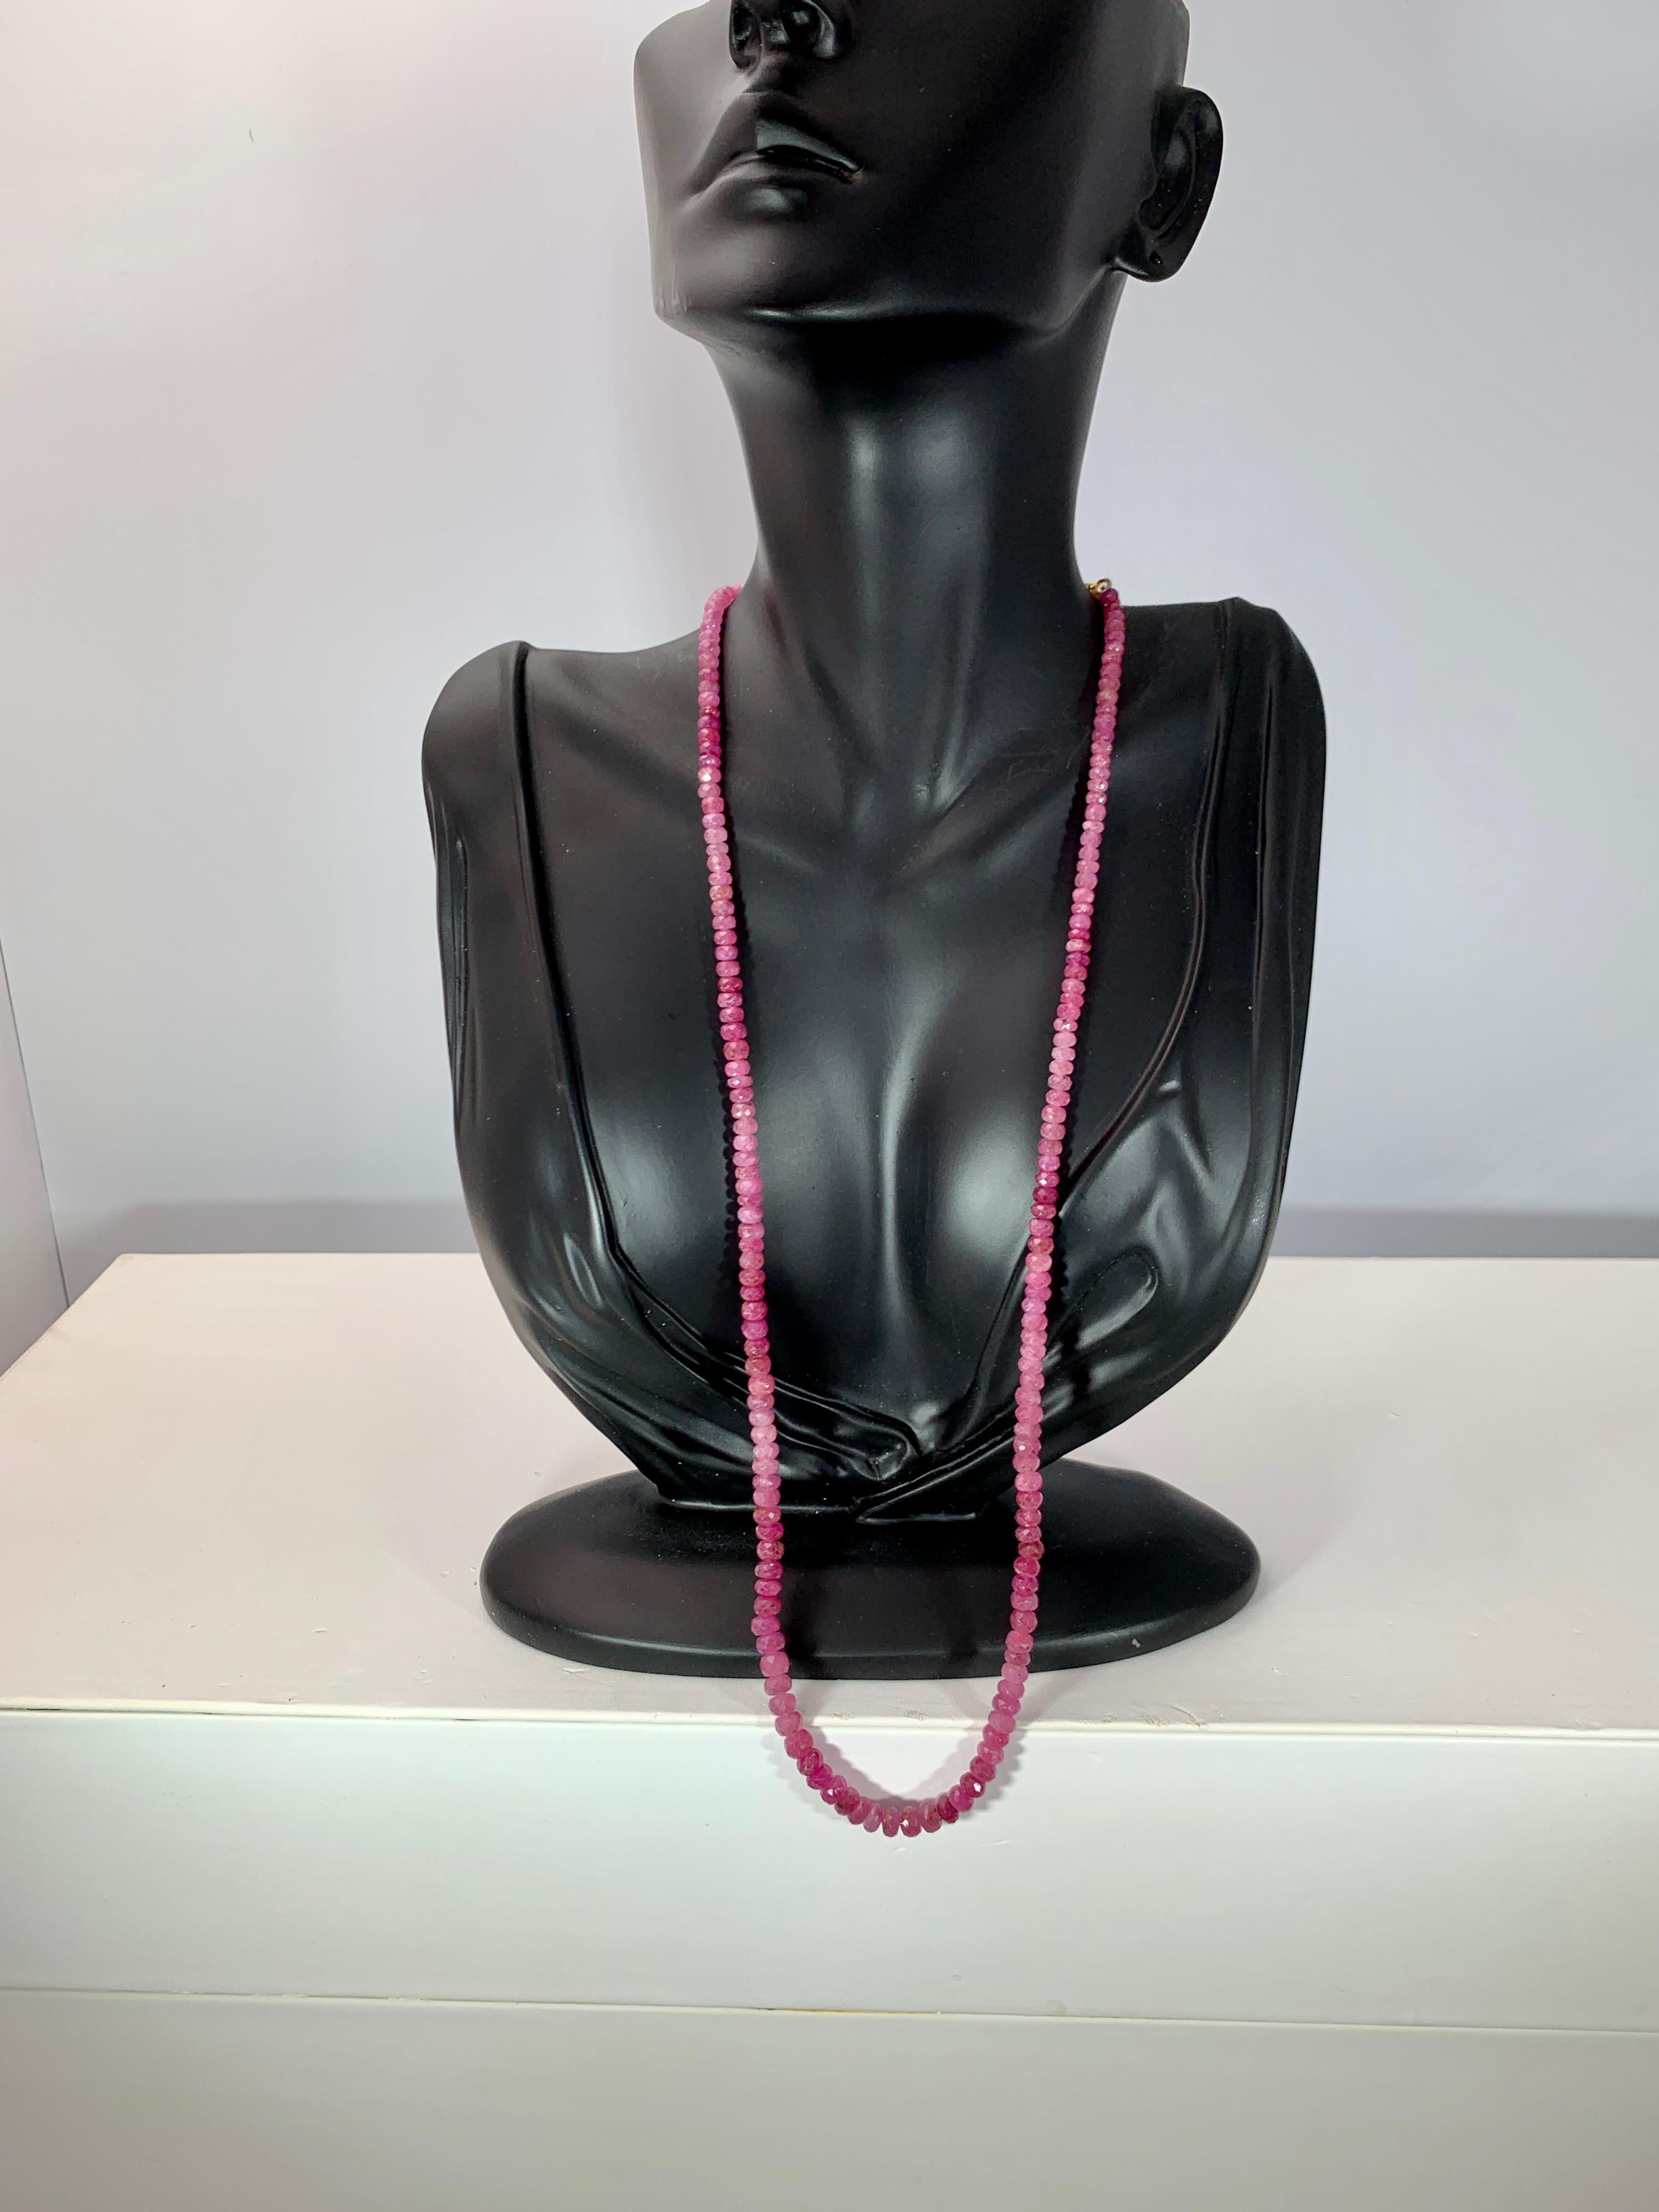 Natural 140 Ct Natural Ruby Bead Single Strand Necklace with Silver Clasp
22